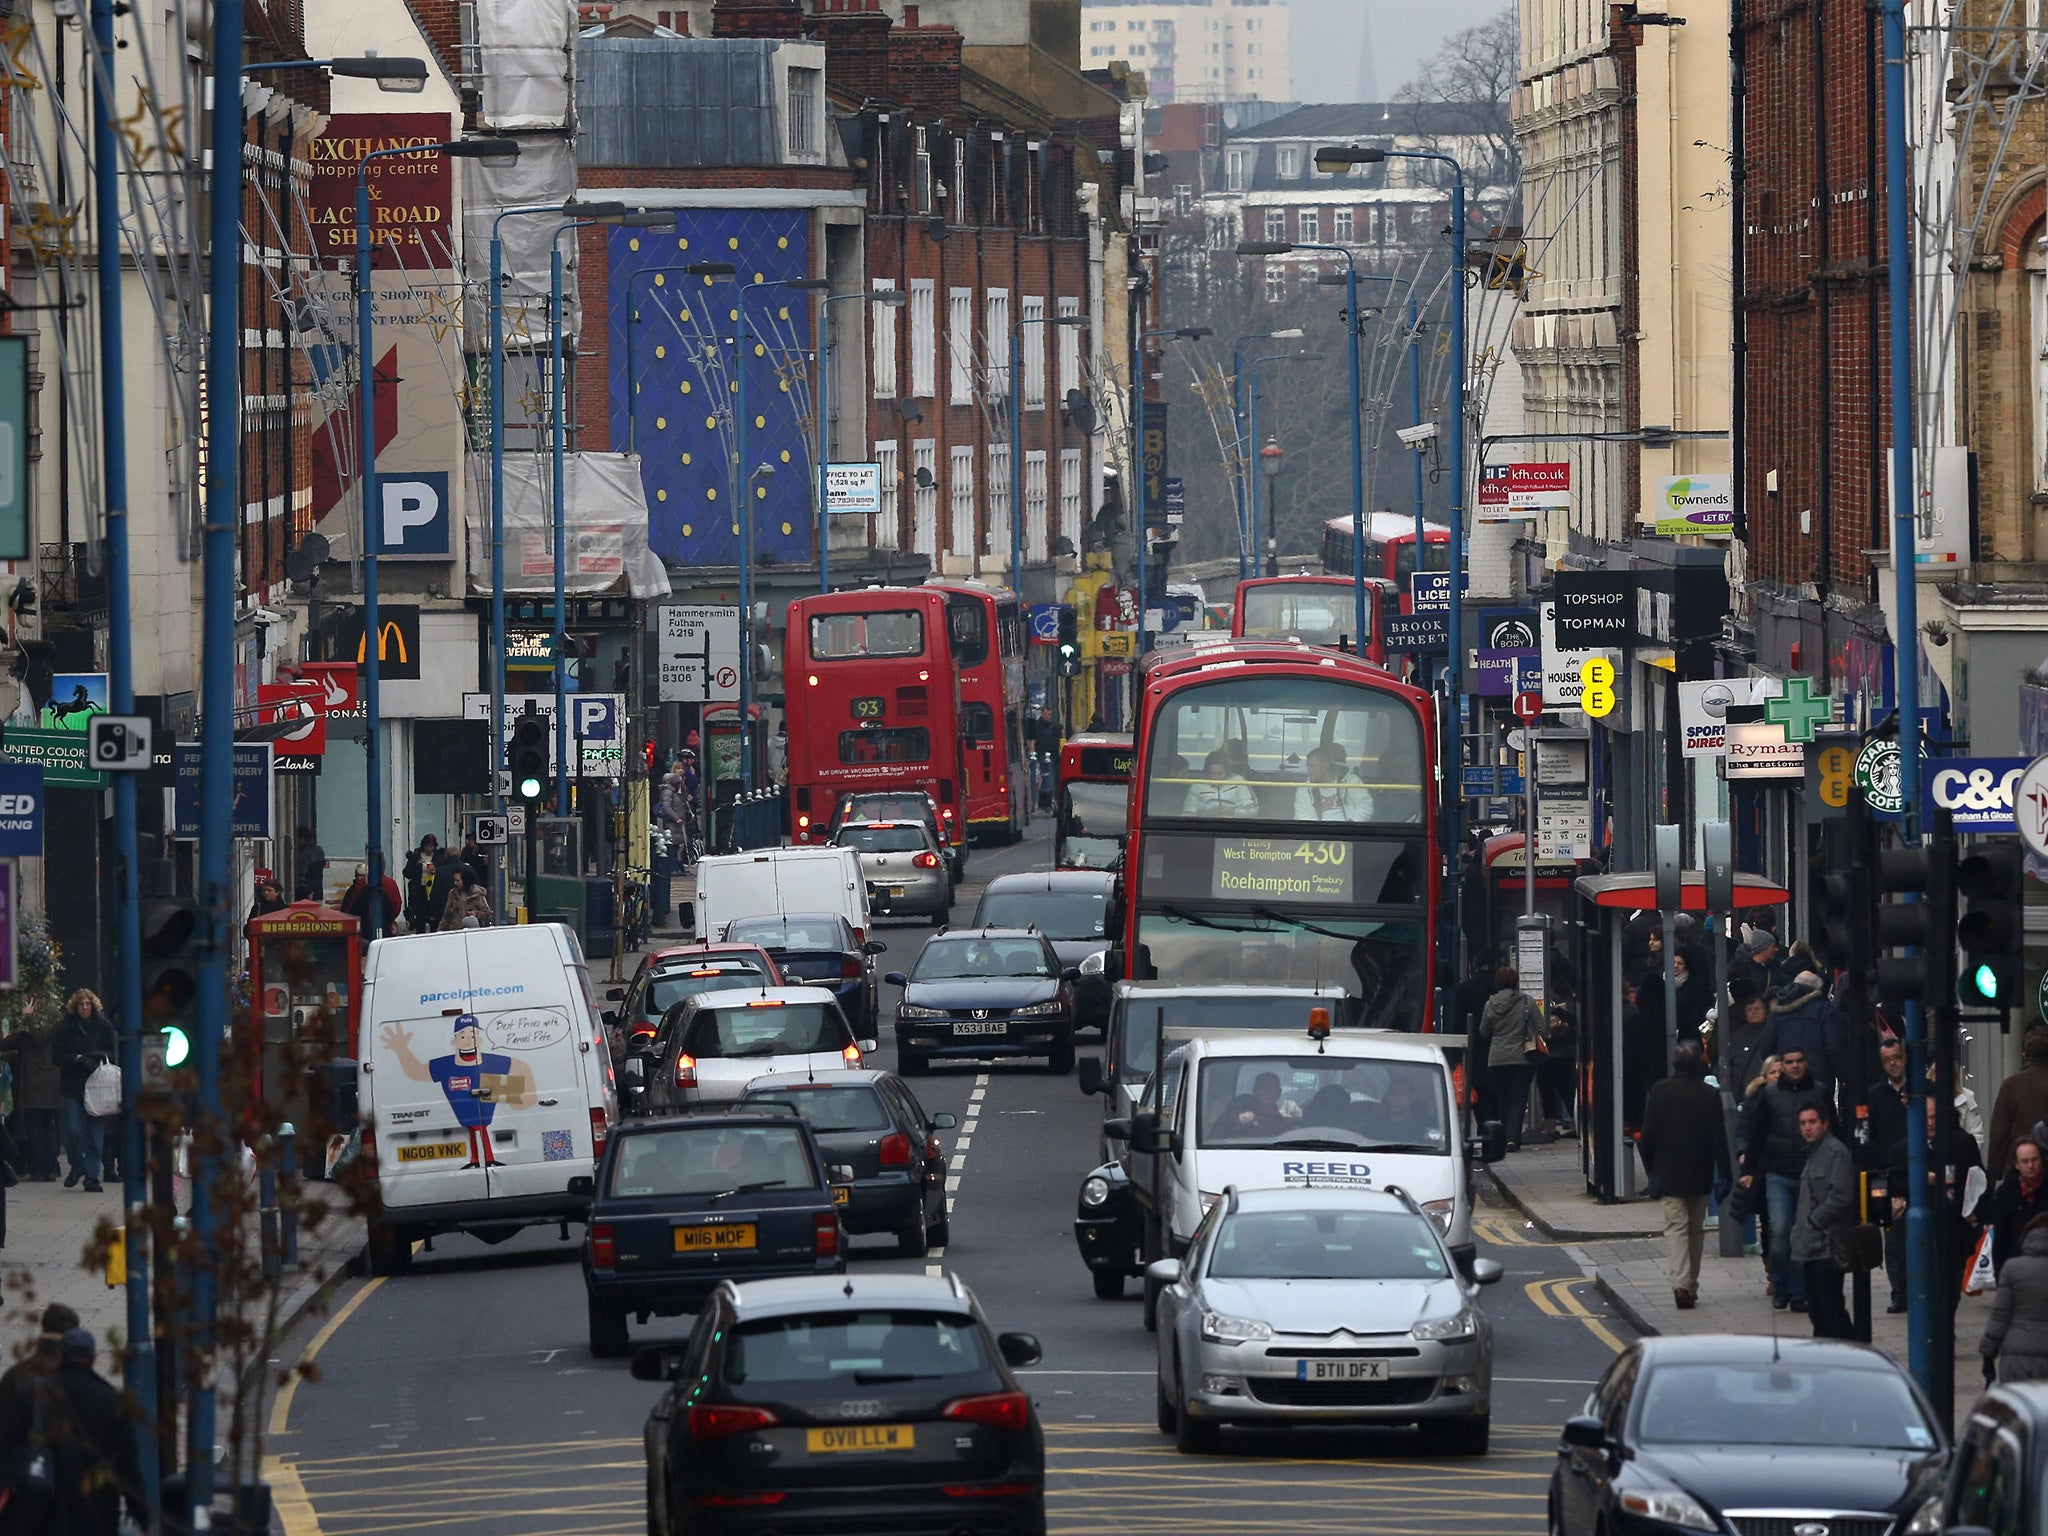 Britain's town and cities are currently overrun with cars spewing out CO2 and other pollutants